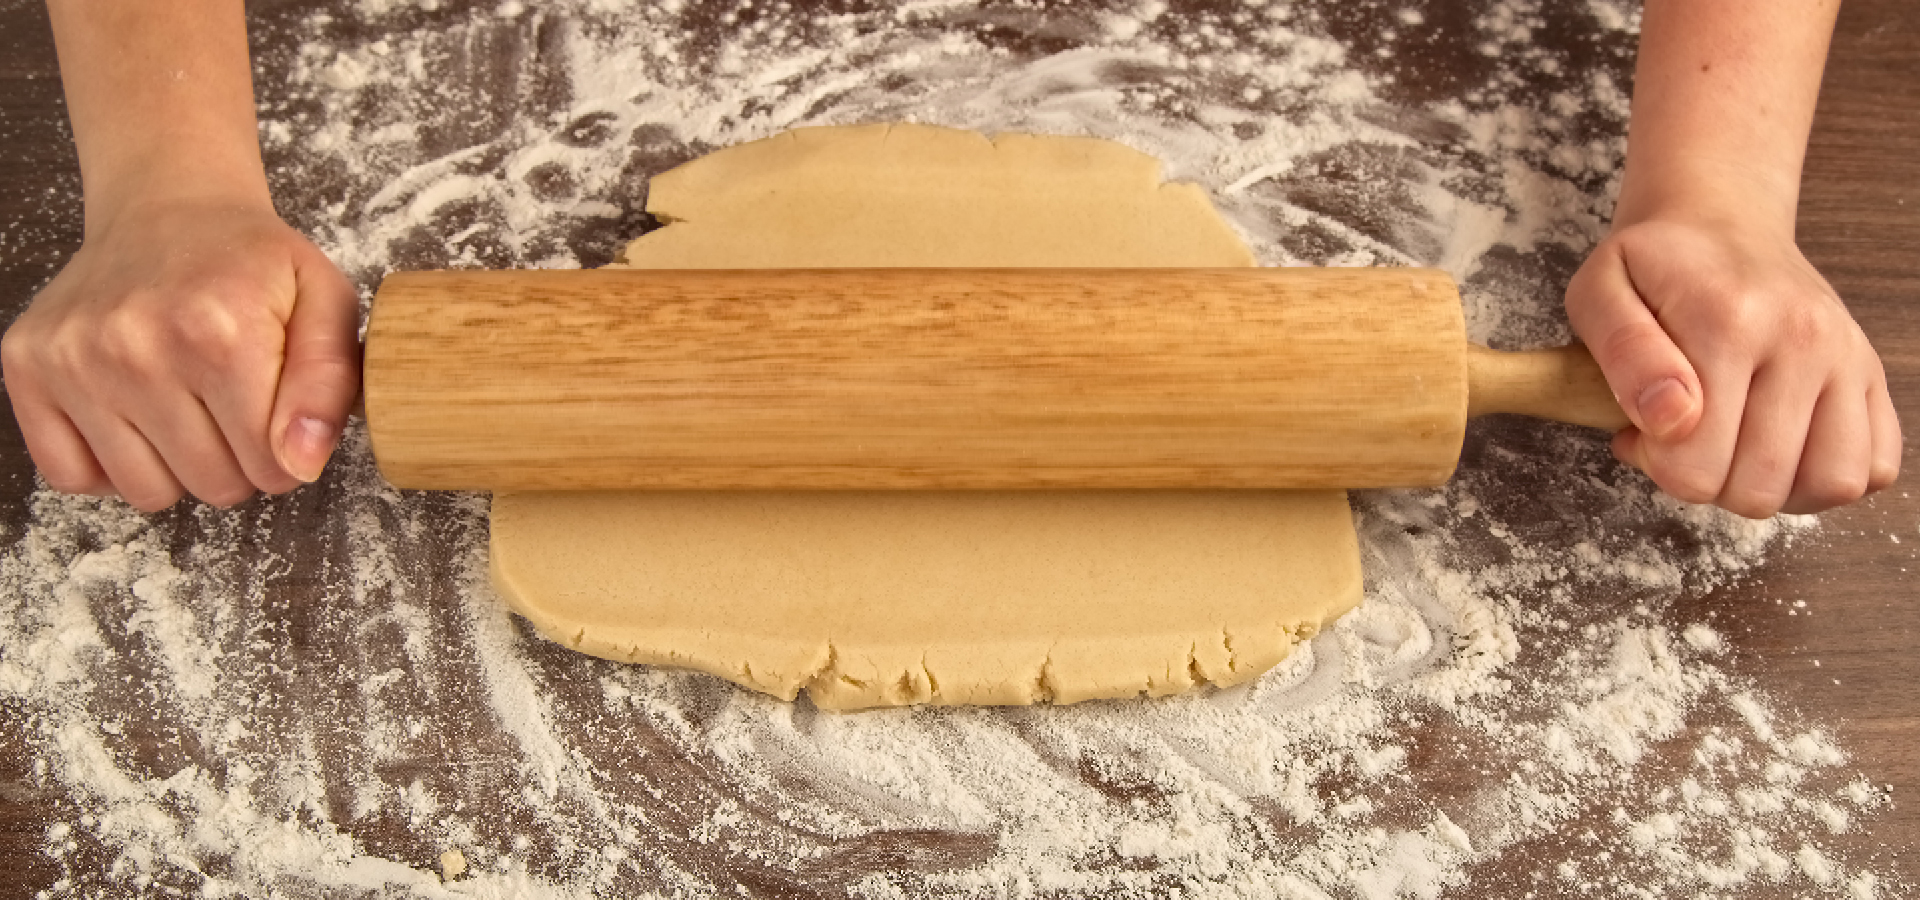 Flattening dough with a rolling pin